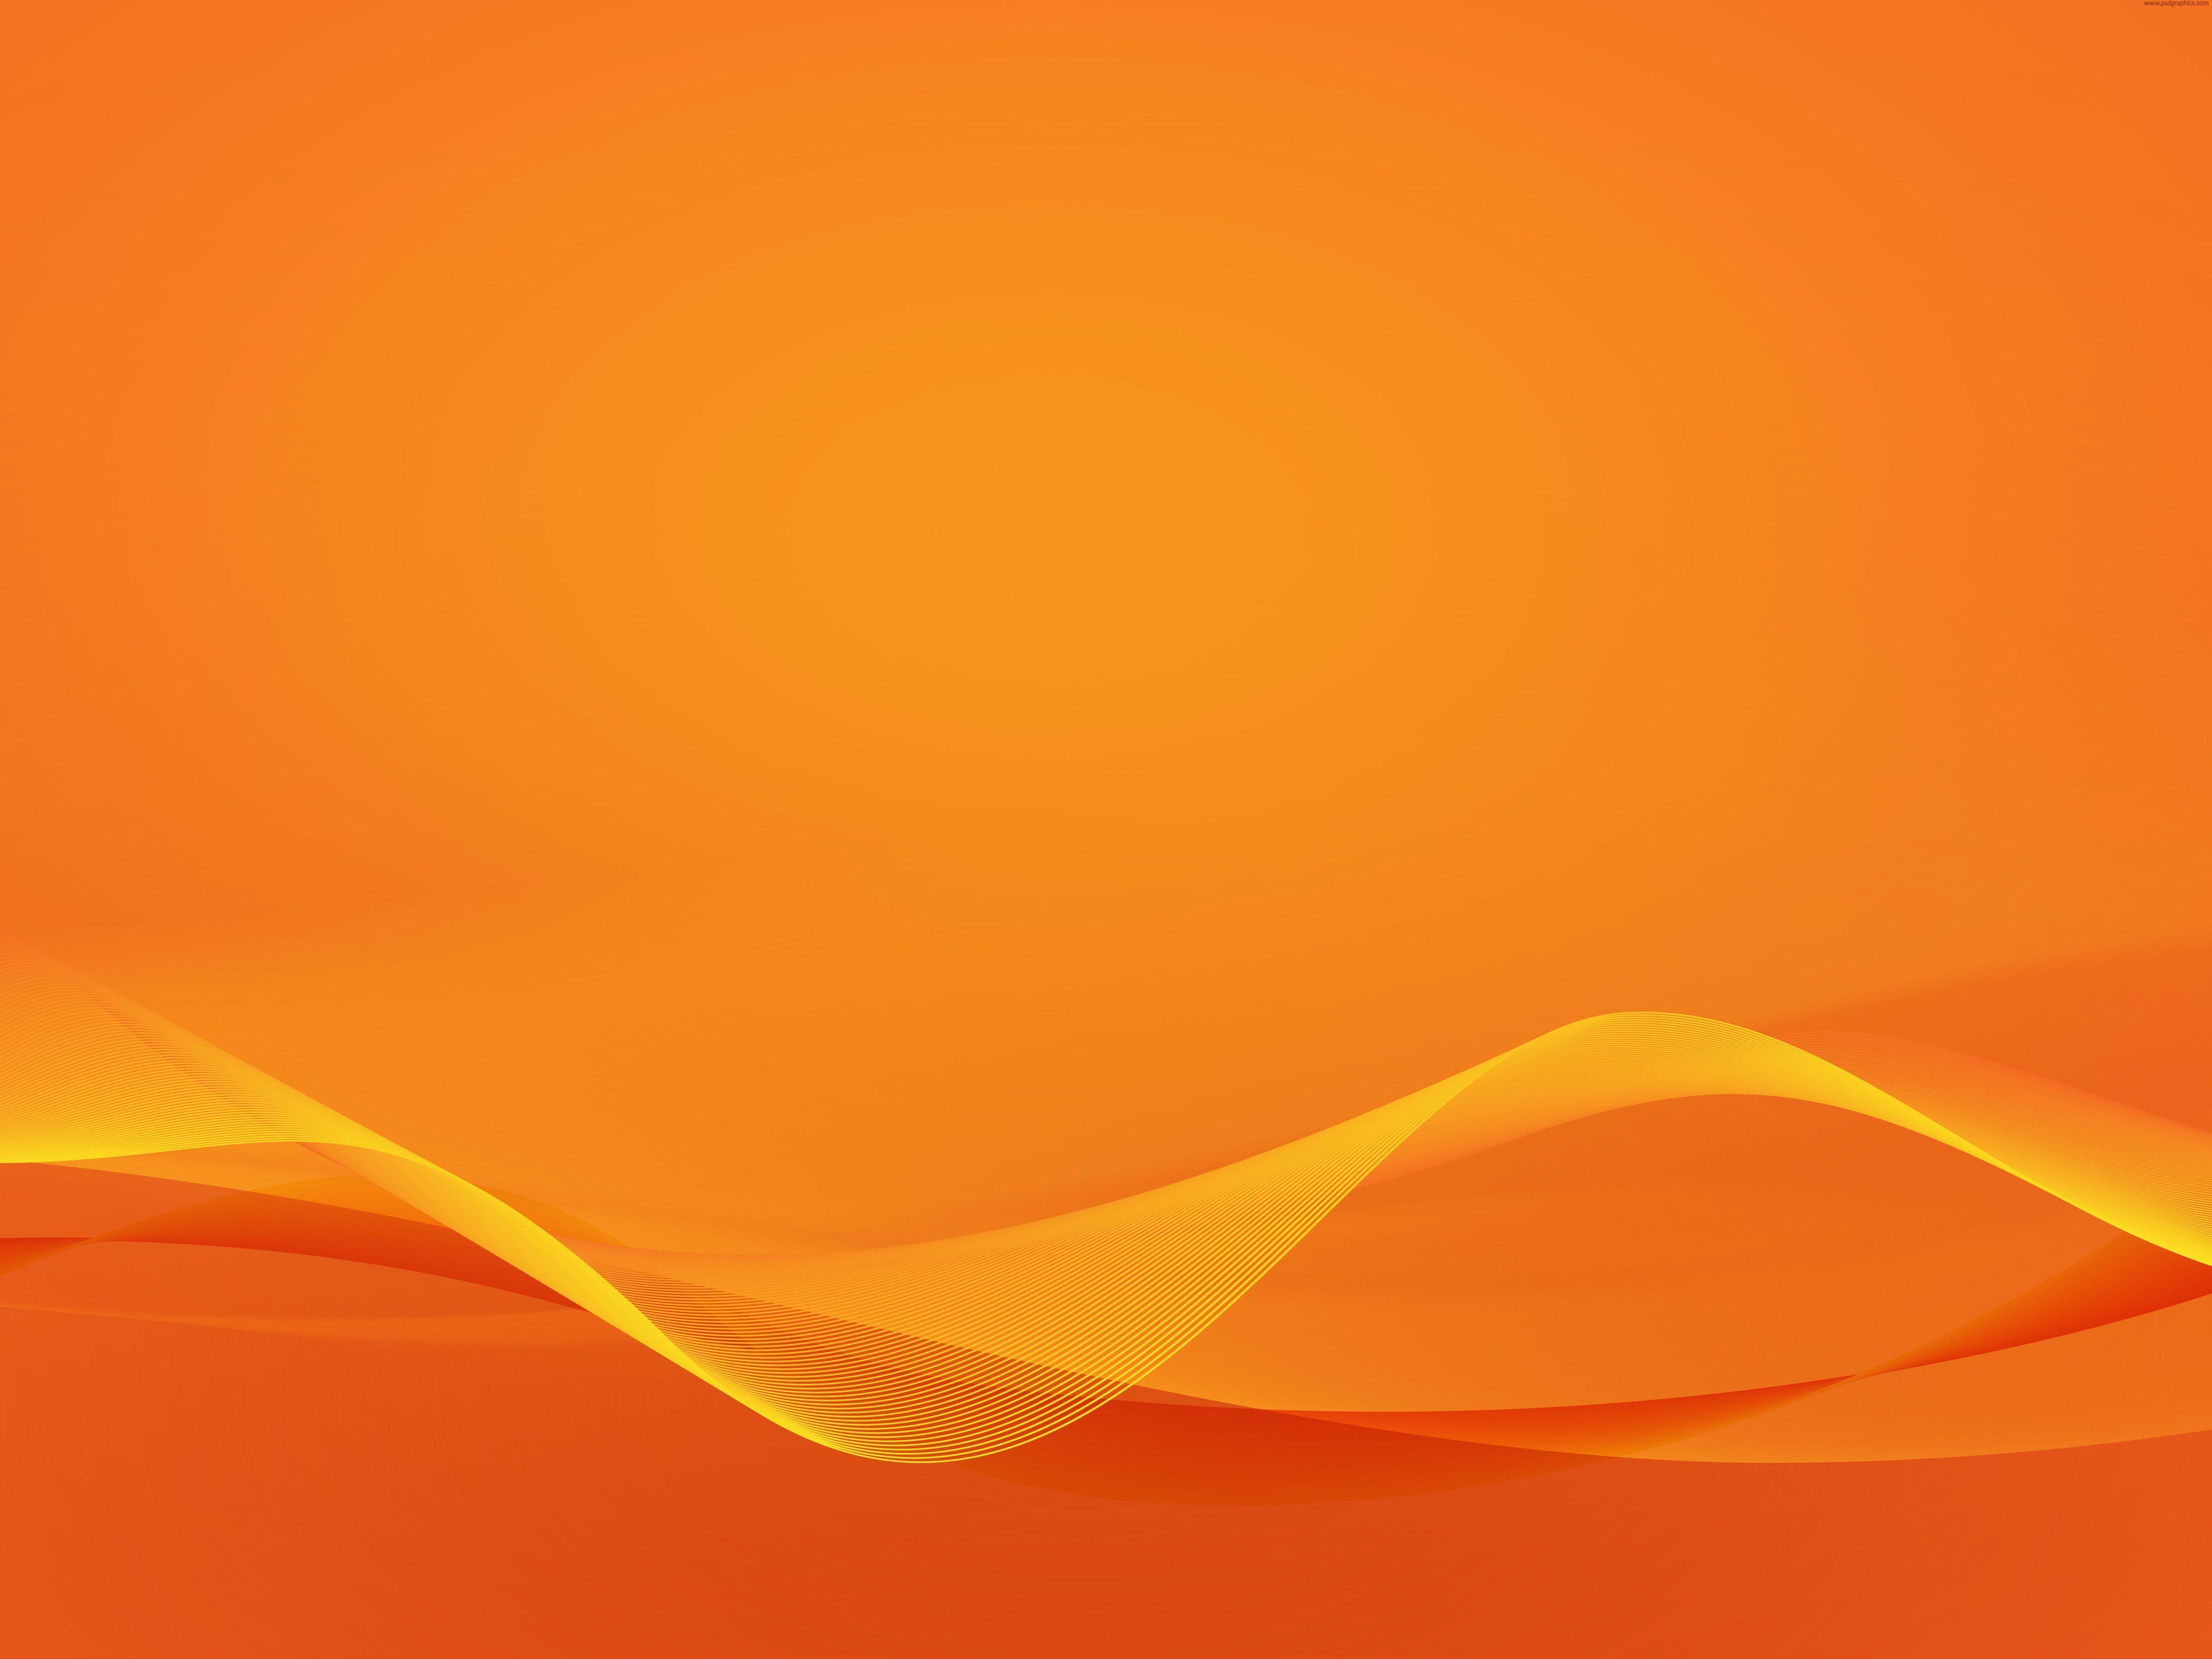 Orange Background Vectors Photo and PSD files Free Download. HD